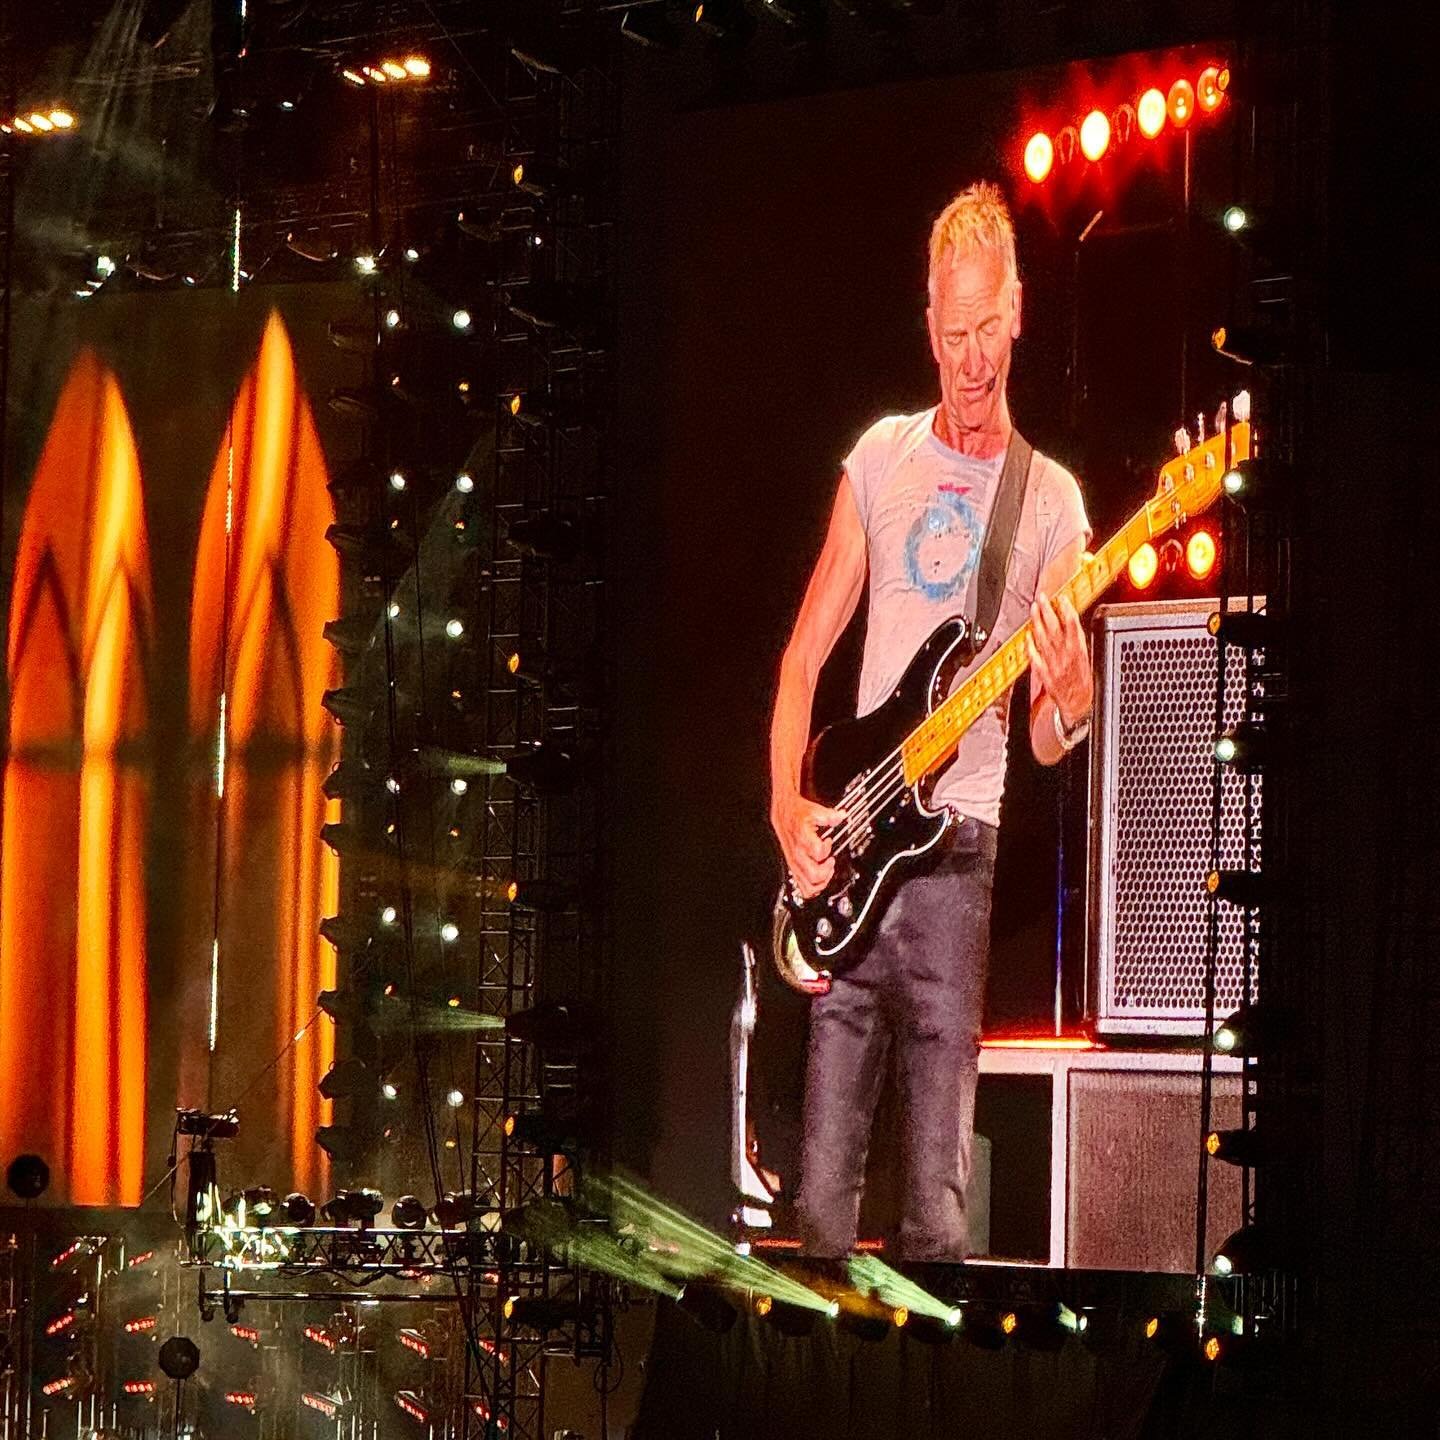 Sting AND Billy Joel, together at @petcopark #sandiego What&rsquo;s not to love!?